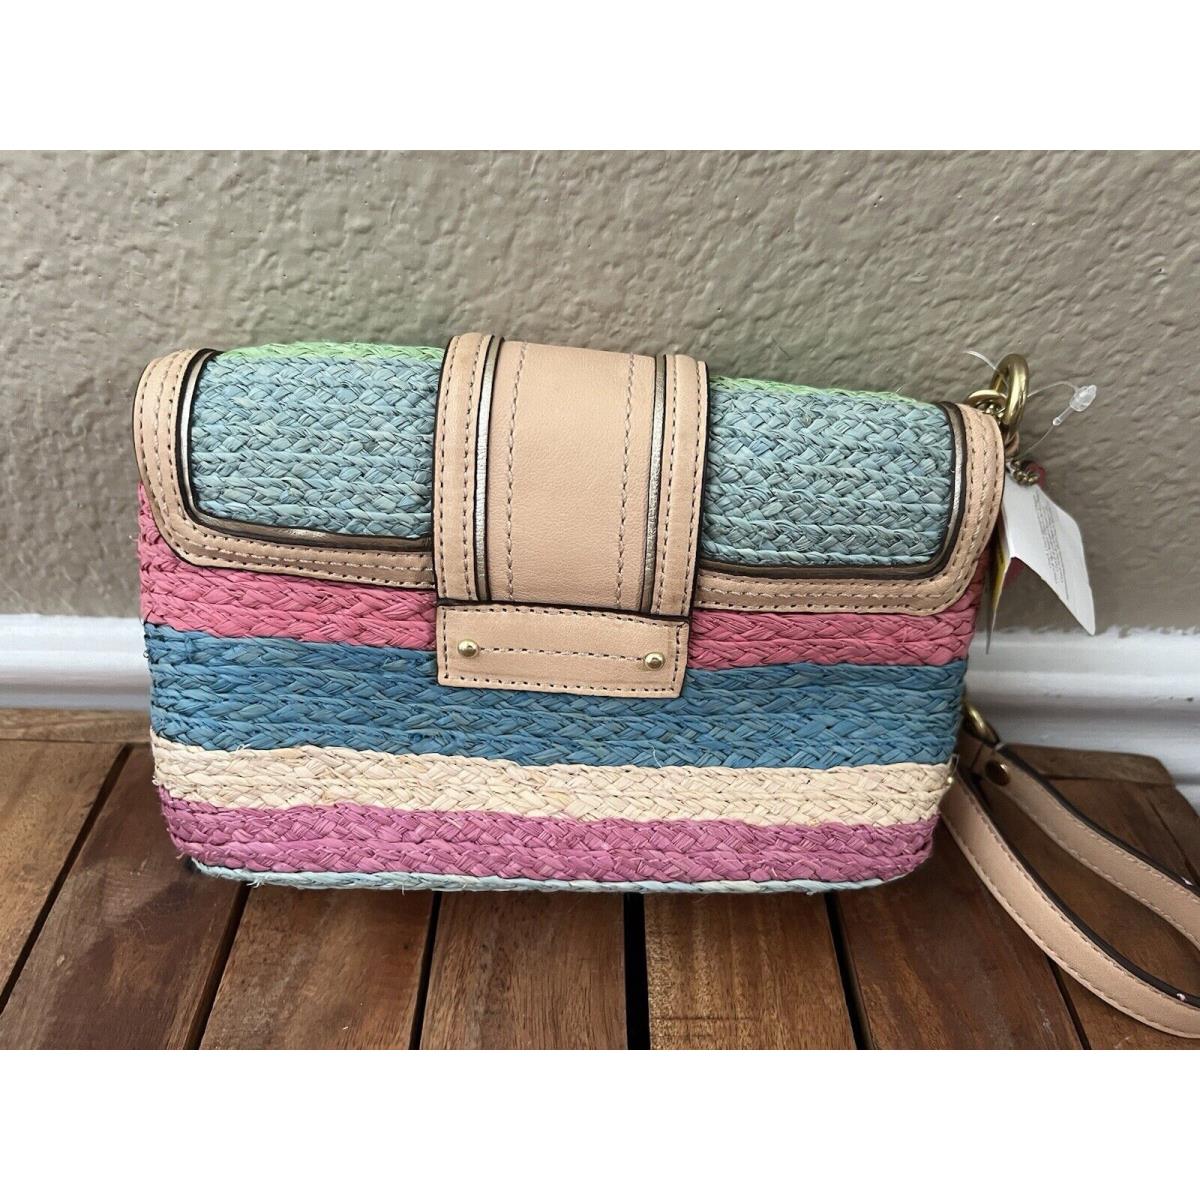 Coach Multi Color Striped Straw Clutch/wristlet / Leather Trim Summer Style